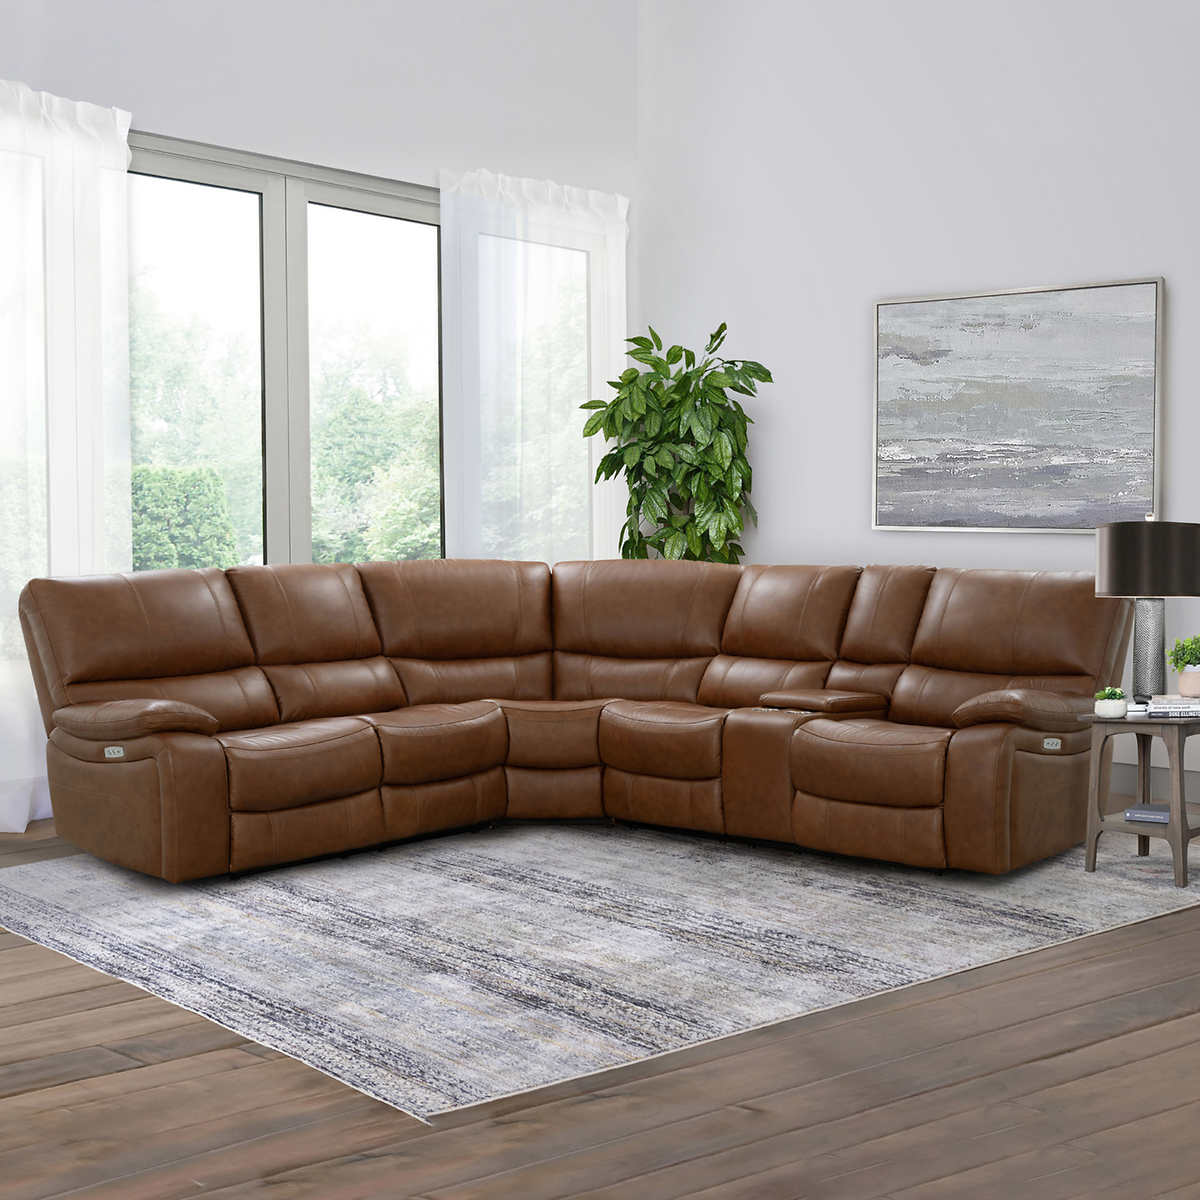 Braymor 3 Piece Top Grain Leather Power, 3 Piece Leather Sectional